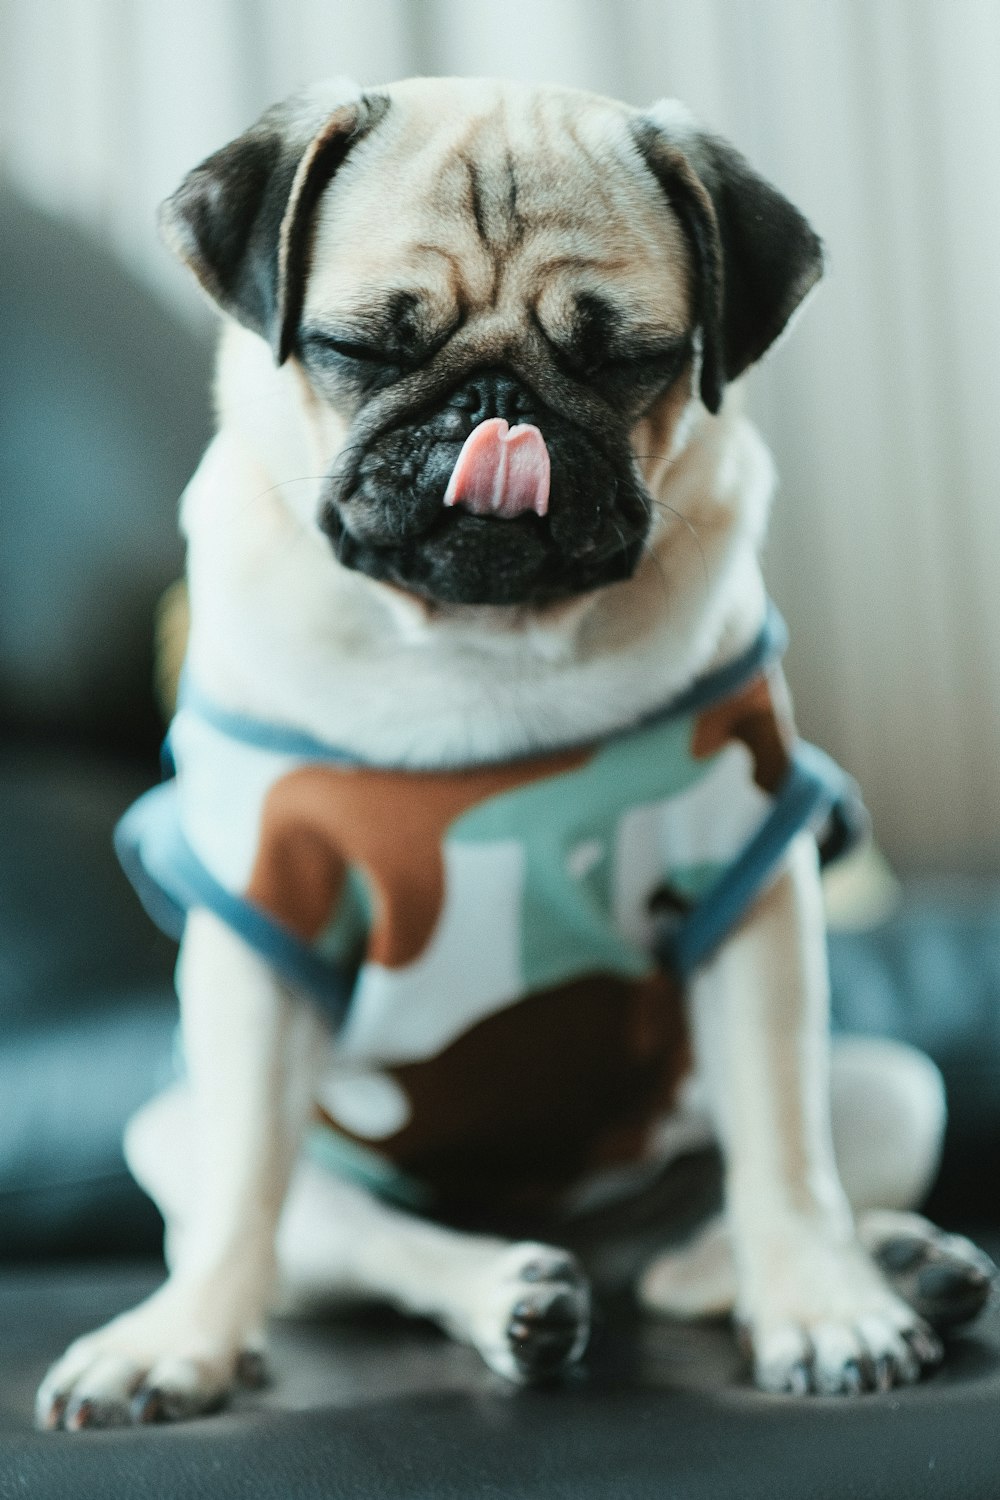 fawn pug wearing blue and white shirt